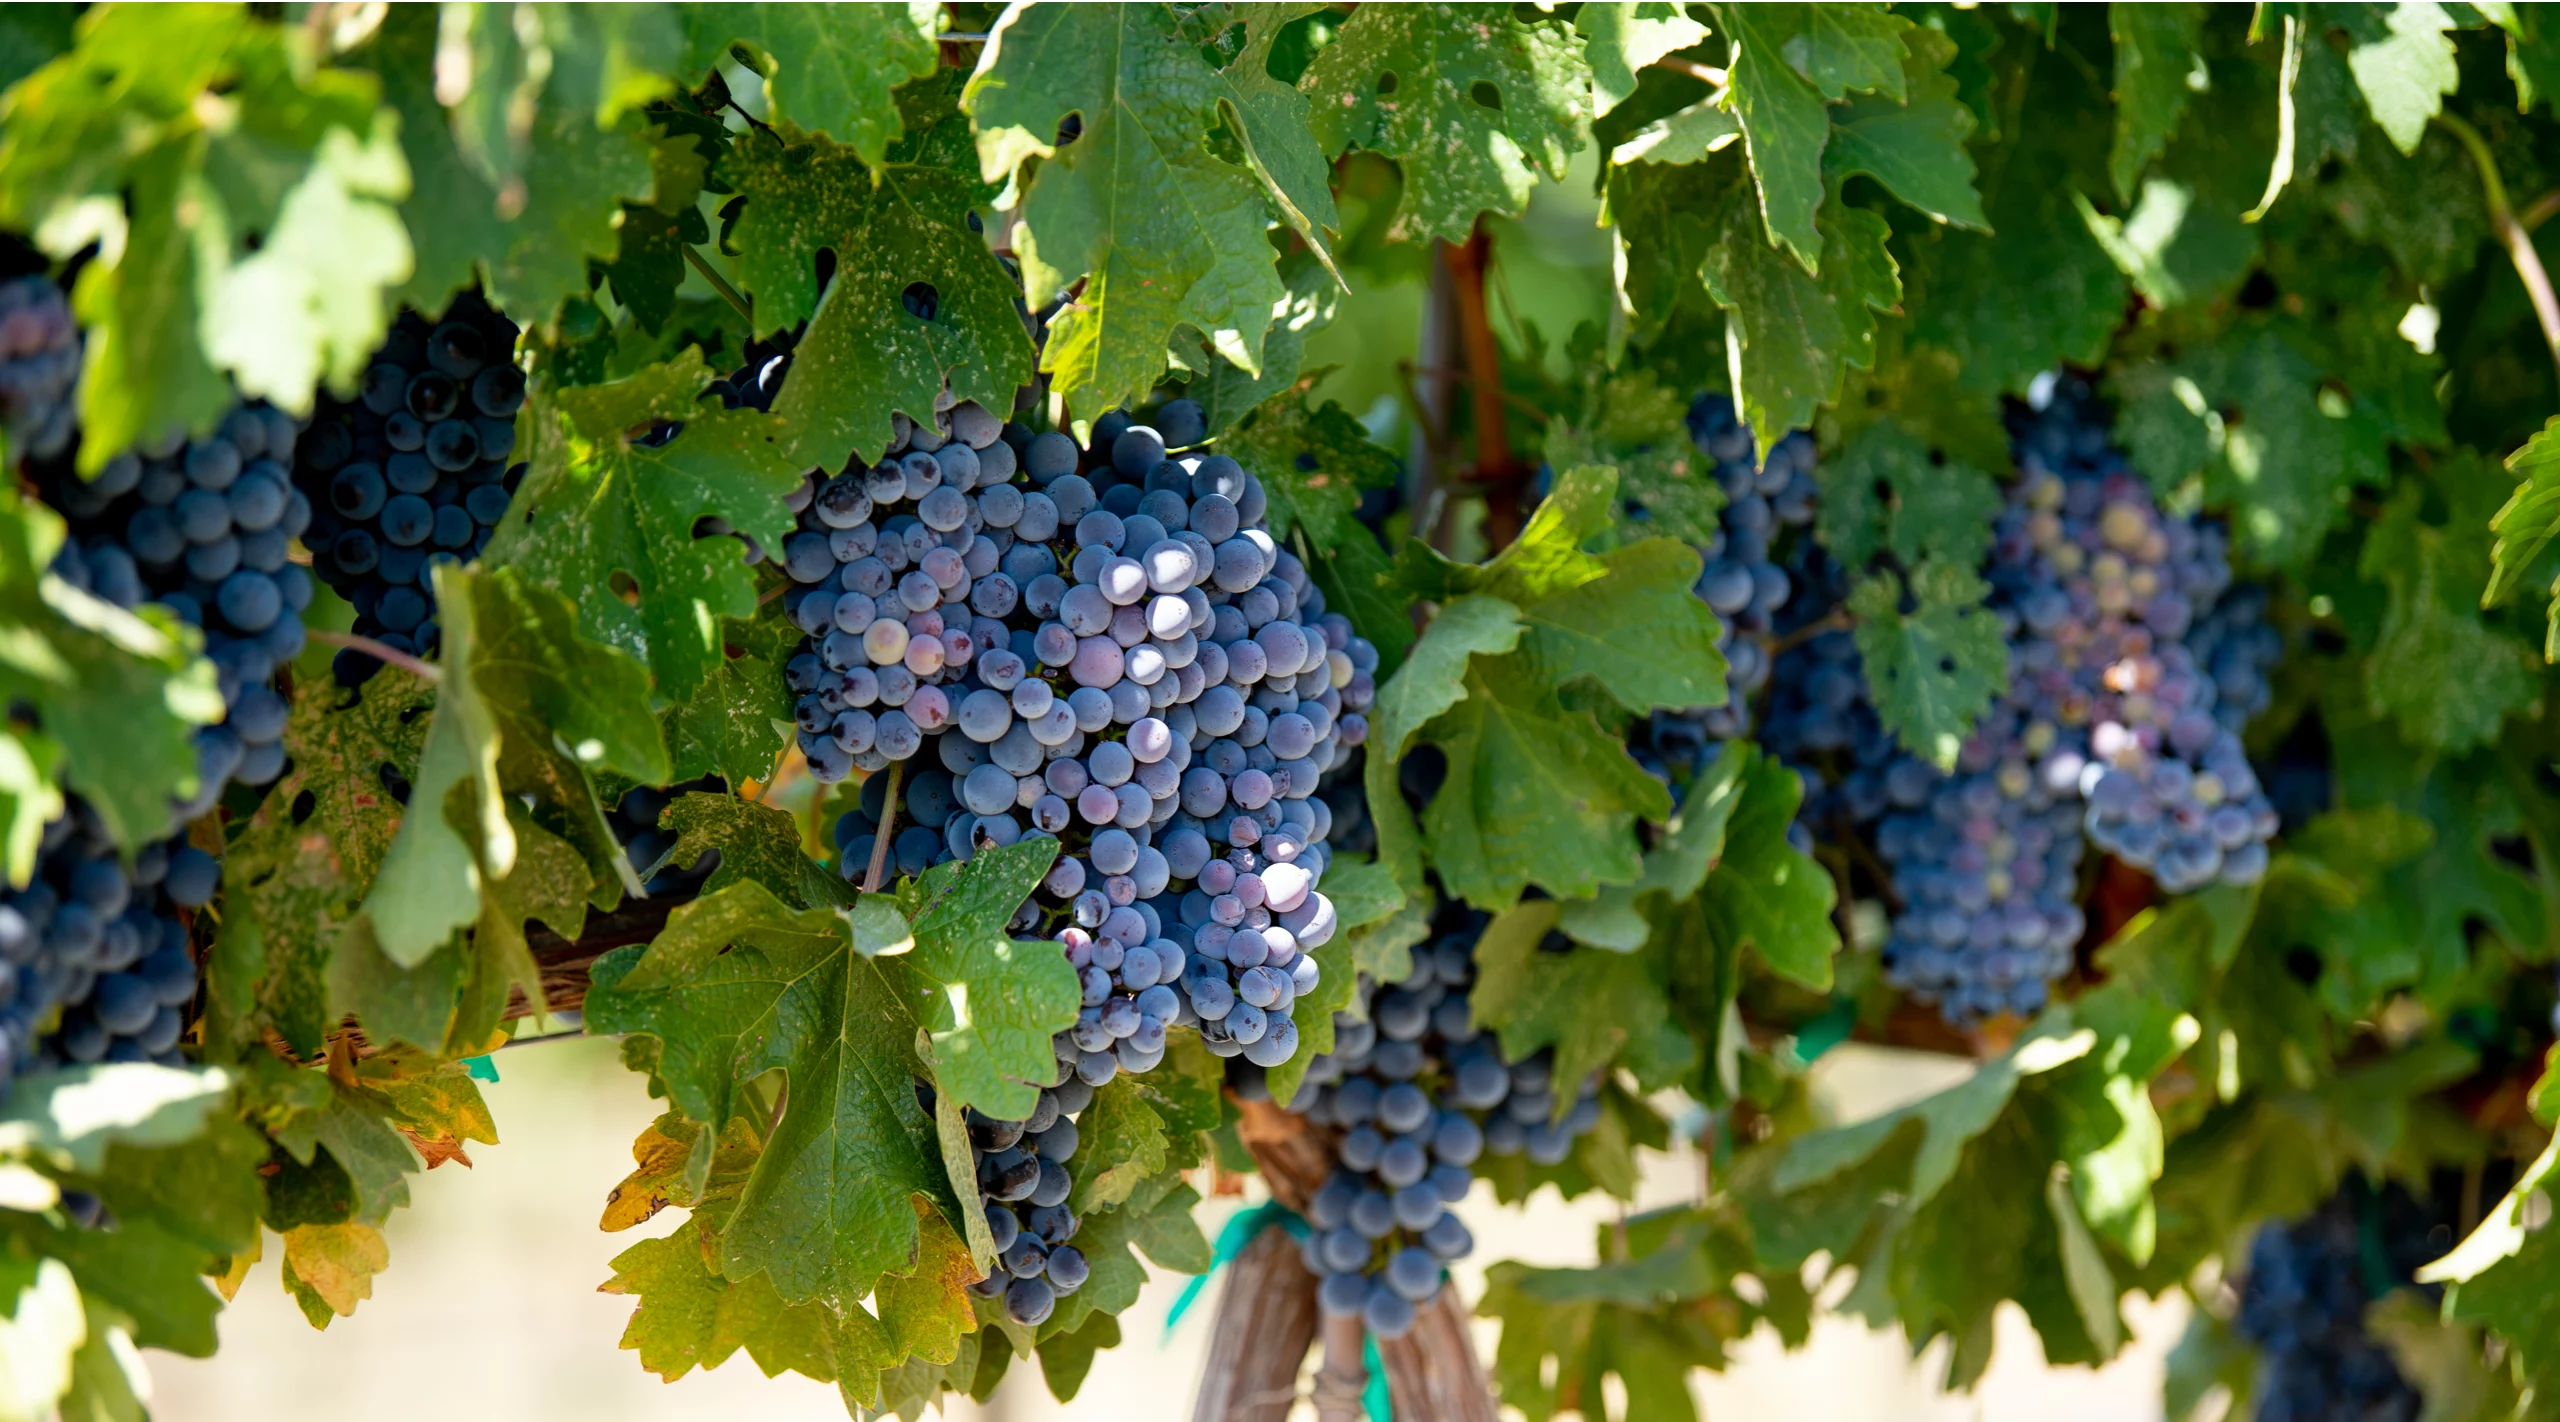 Closeup of several bunches of grapes in the vine and ready for harvest